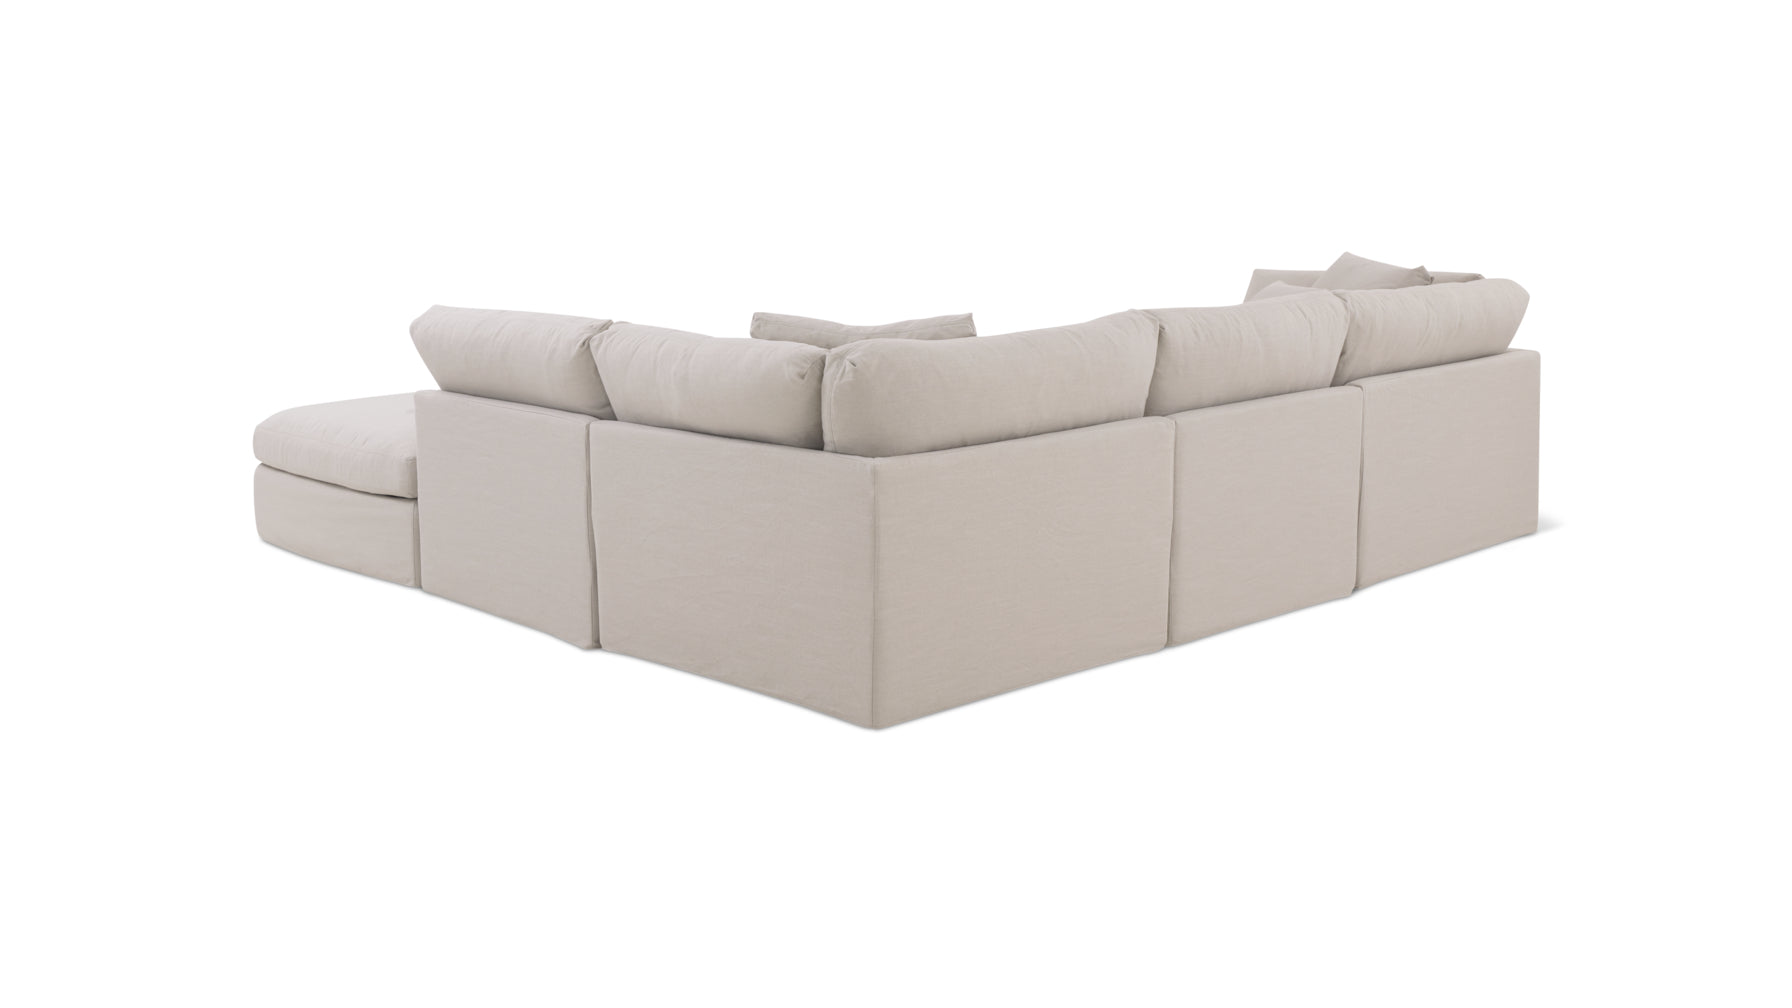 Get Together™ 5-Piece Modular Sectional, Large, Clay - Image 10